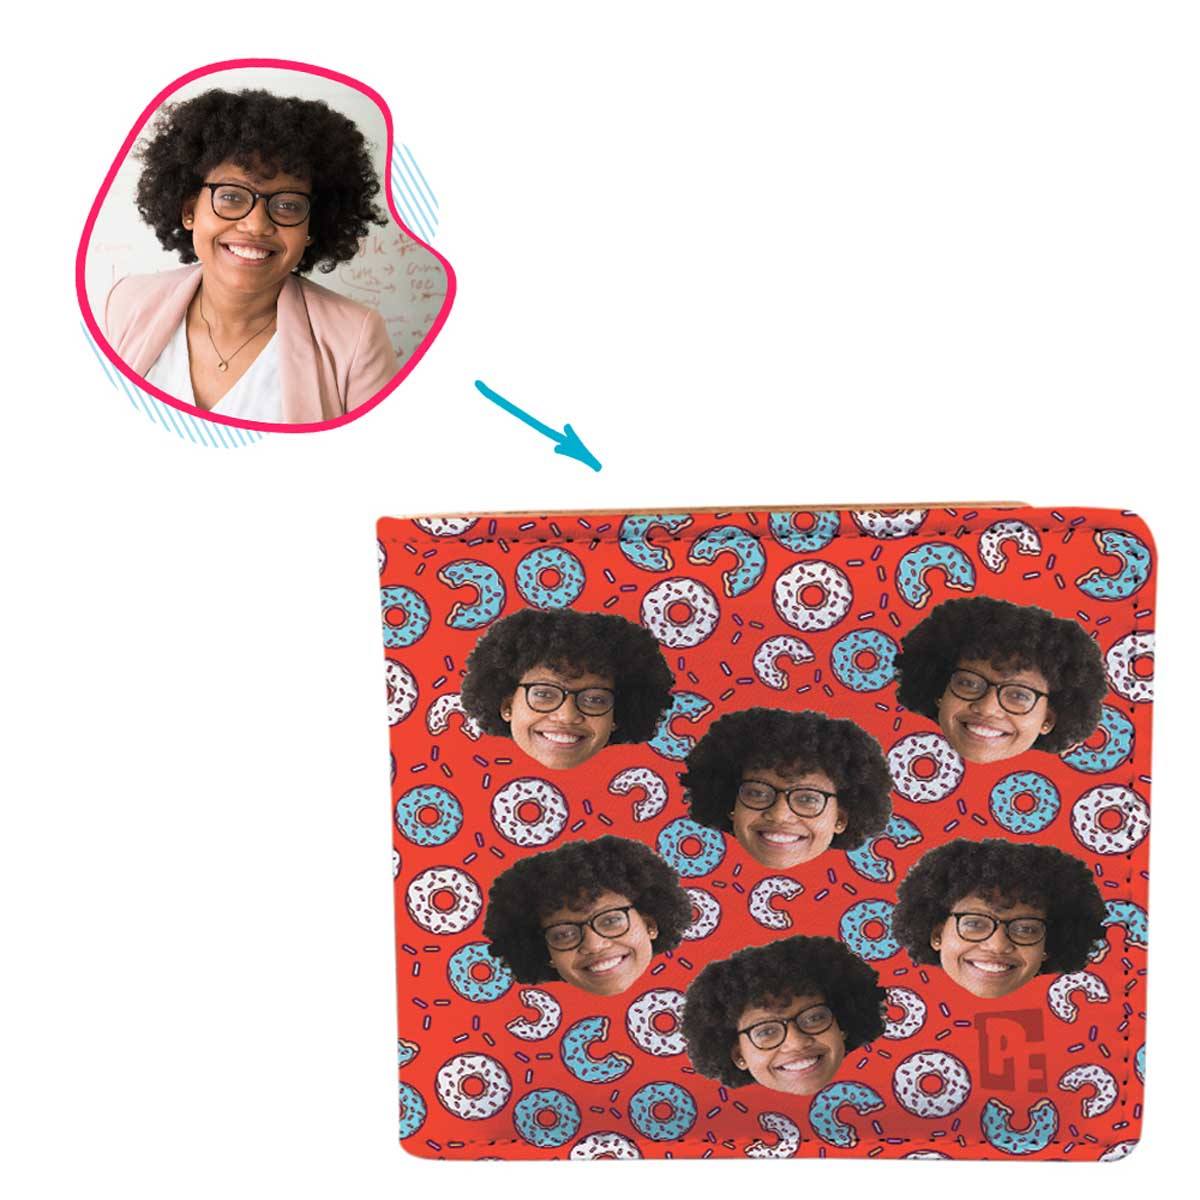 red Donuts wallet personalized with photo of face printed on it